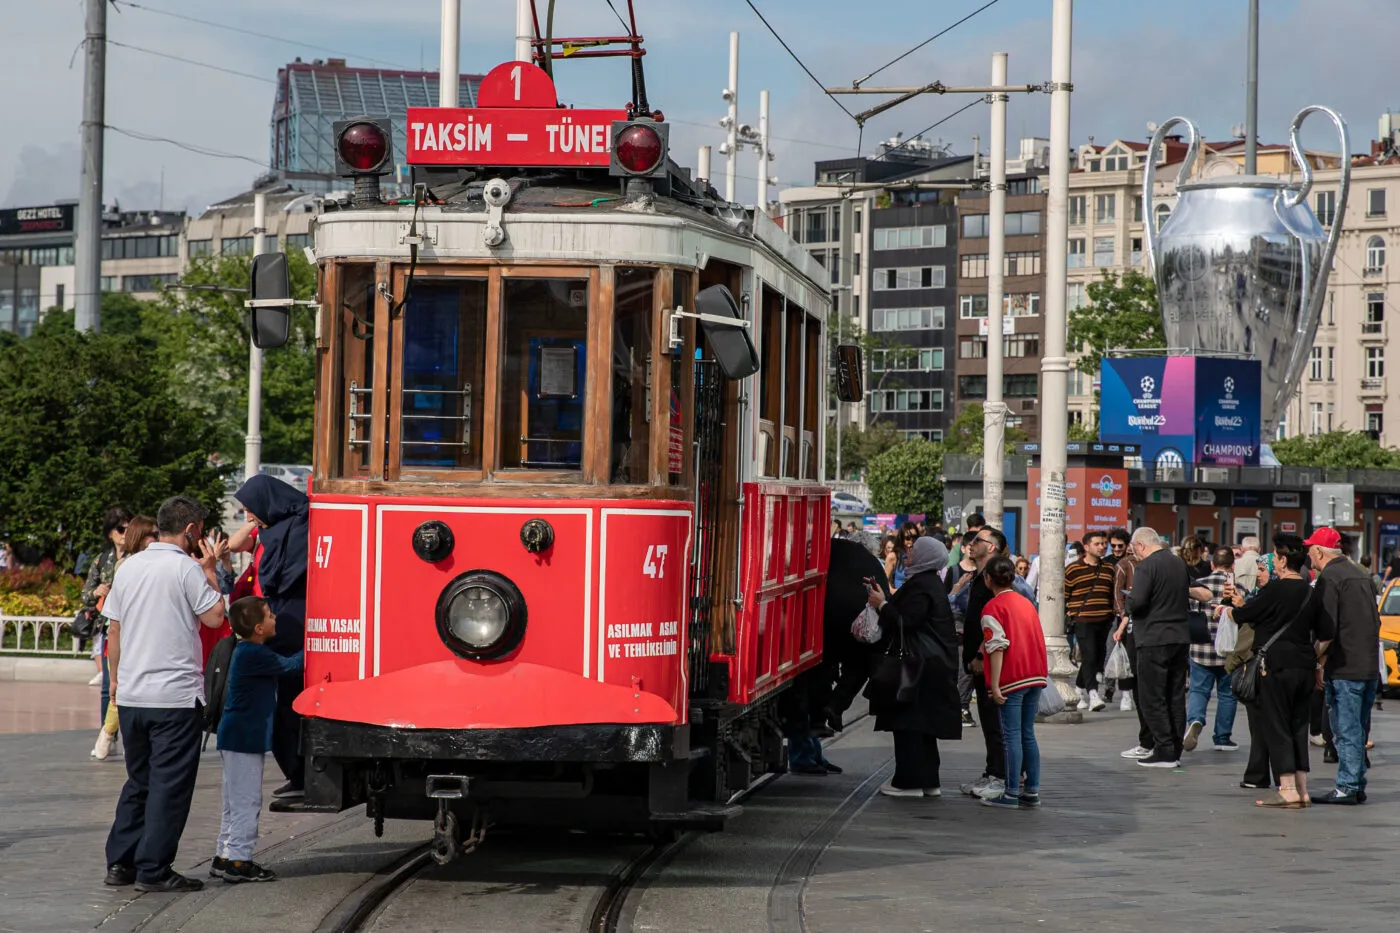 With the nostalgic tram standing in Taksim square, the 2023 UEFA Champions League giant trophy seen in the background. Manchester City and Inter will face each other in the final match that will determine the champion of the UEFA Champions League season on Saturday, June 10, 2023 at Ataturk Olympic Stadium. As part of the festival, a giant Champions League trophy and a model of a soccer ball were seen in Taksim. It was met with intense interest from domestic and foreign tourists. (Photo by Onur Dogman / SOPA Images/Sipa USA) - Photo by Icon sport